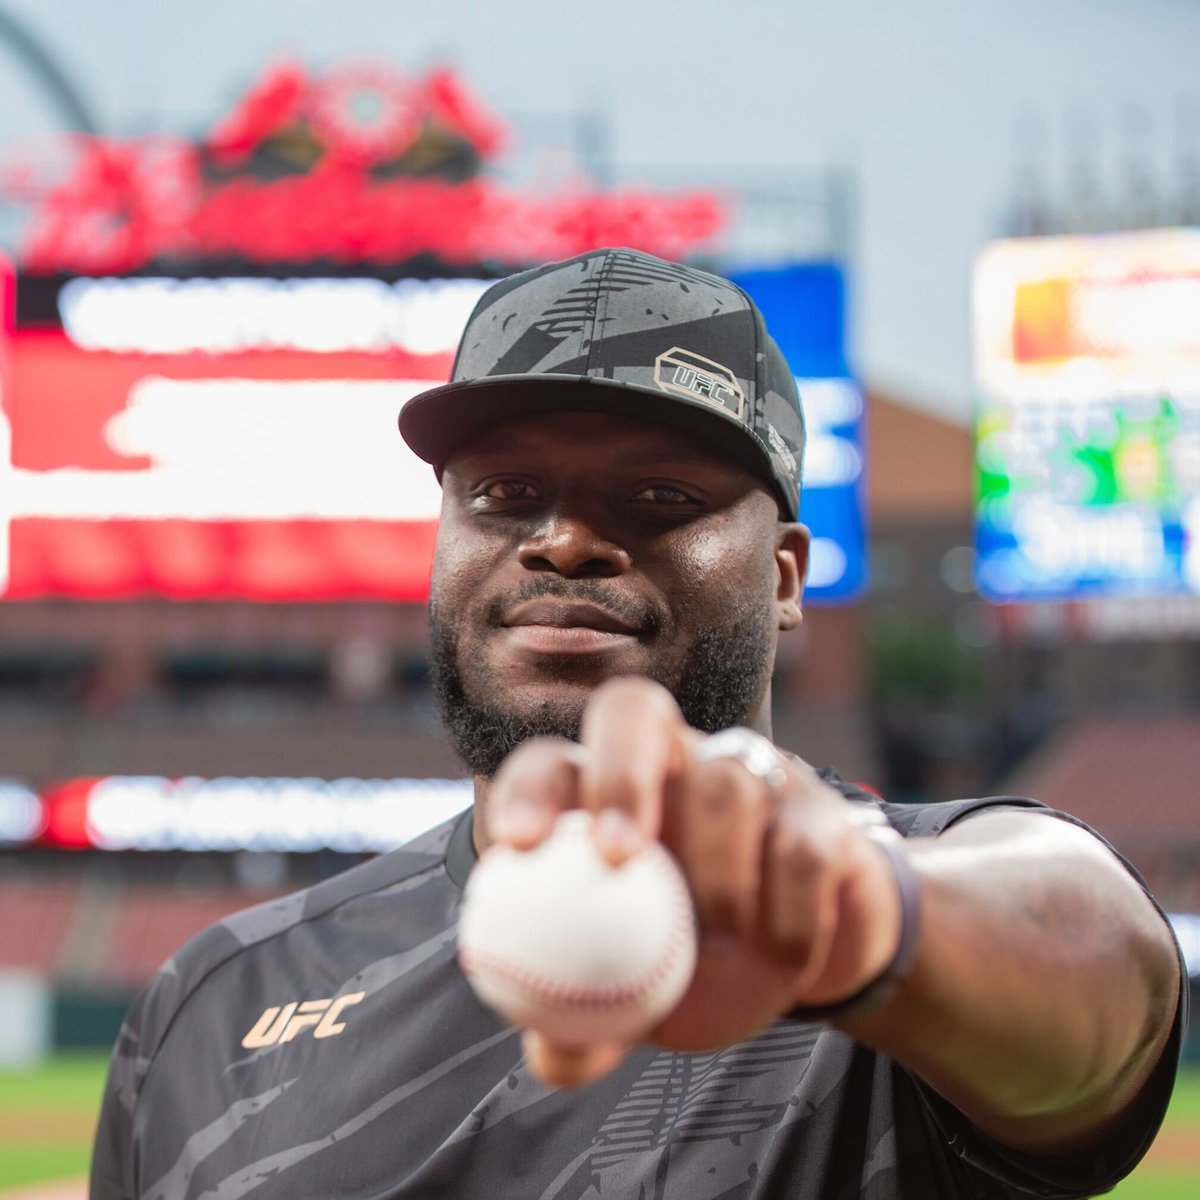 Great to have @Thebeast_ufc at the ballpark today! 🥊 #ForTheLou